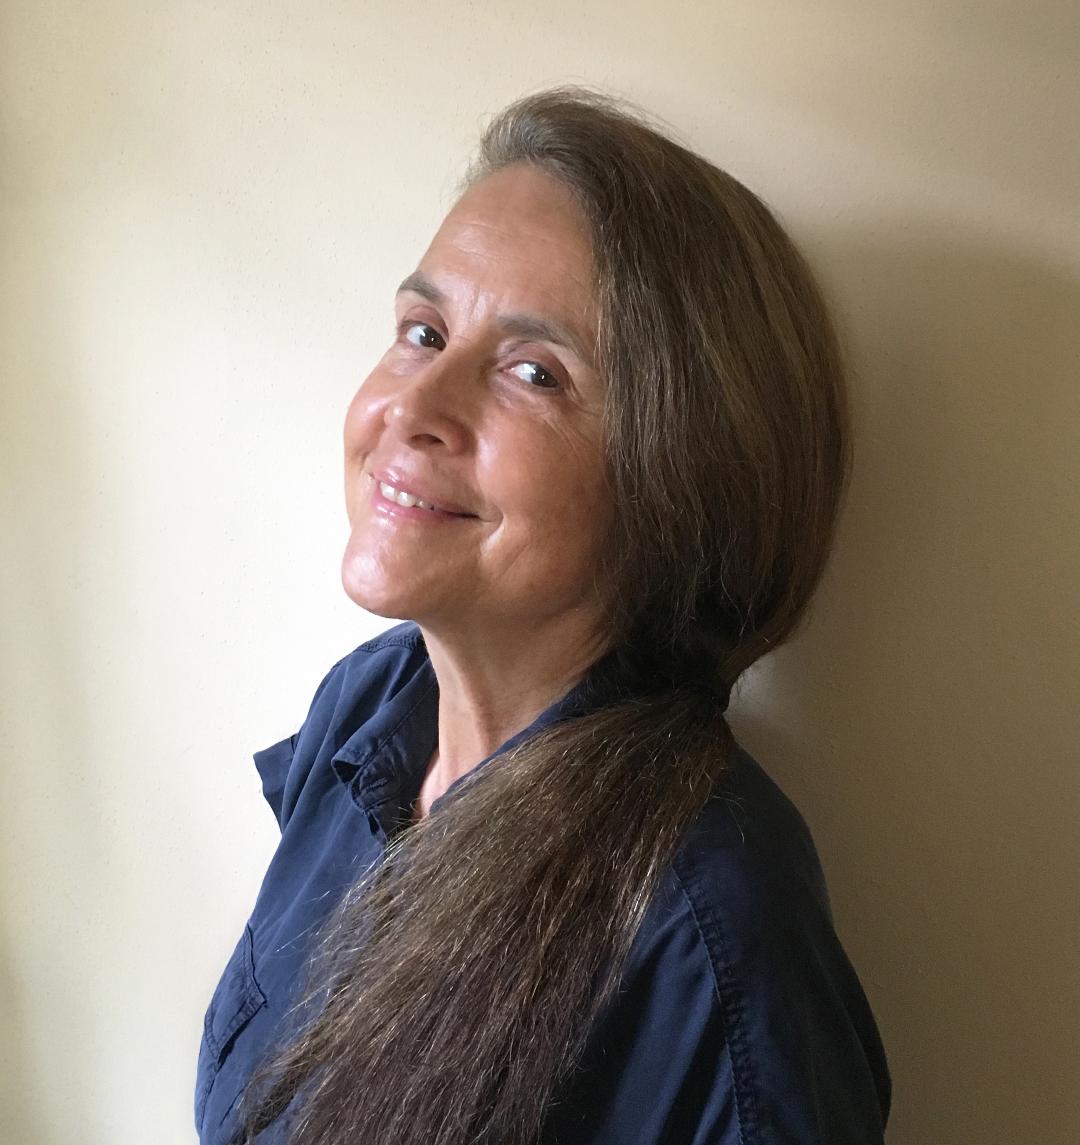 Photo of Naomi Shihab Nye leaning against a light tan wall. Nye is wearing a blue collar shirt and is smiling at the camera.